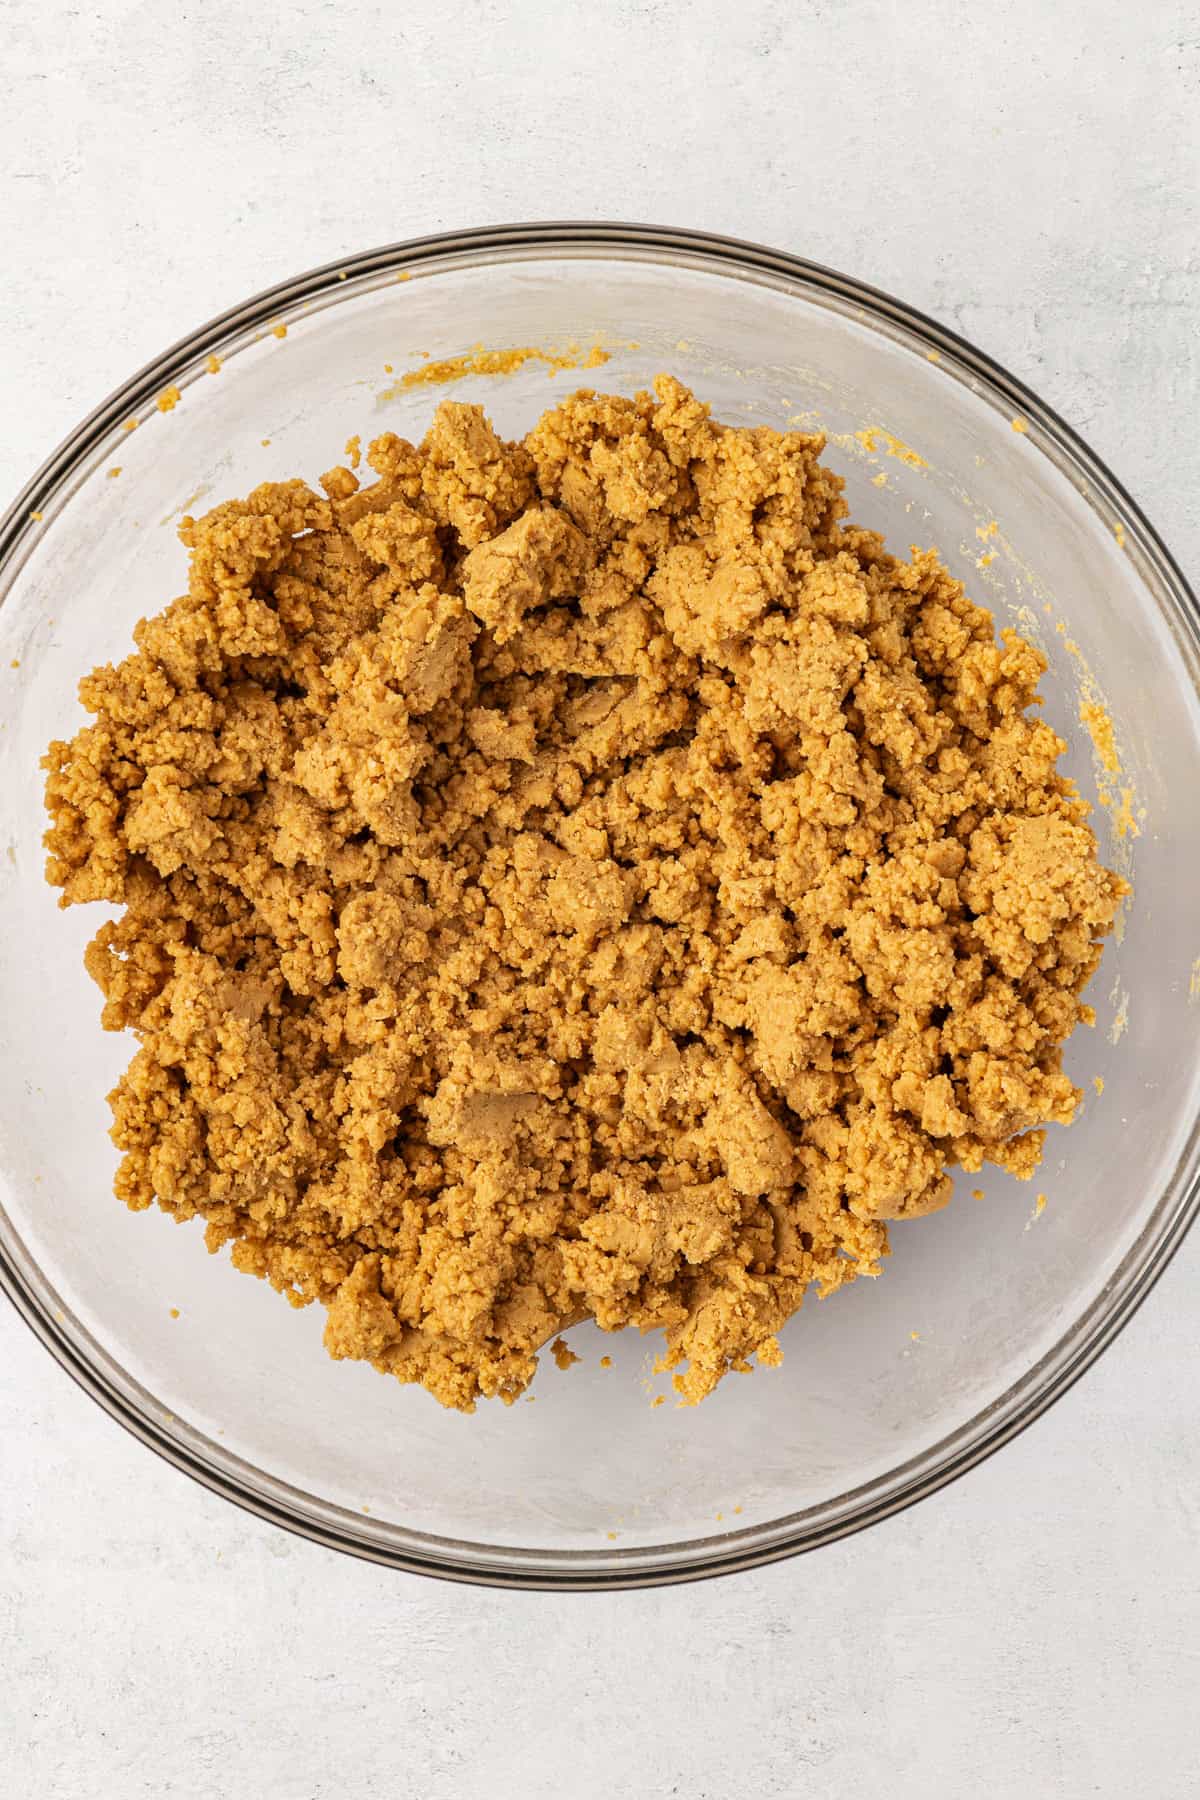 a peanut butter and graham cracker mixture for peanut butter bars in a clear glass bowl